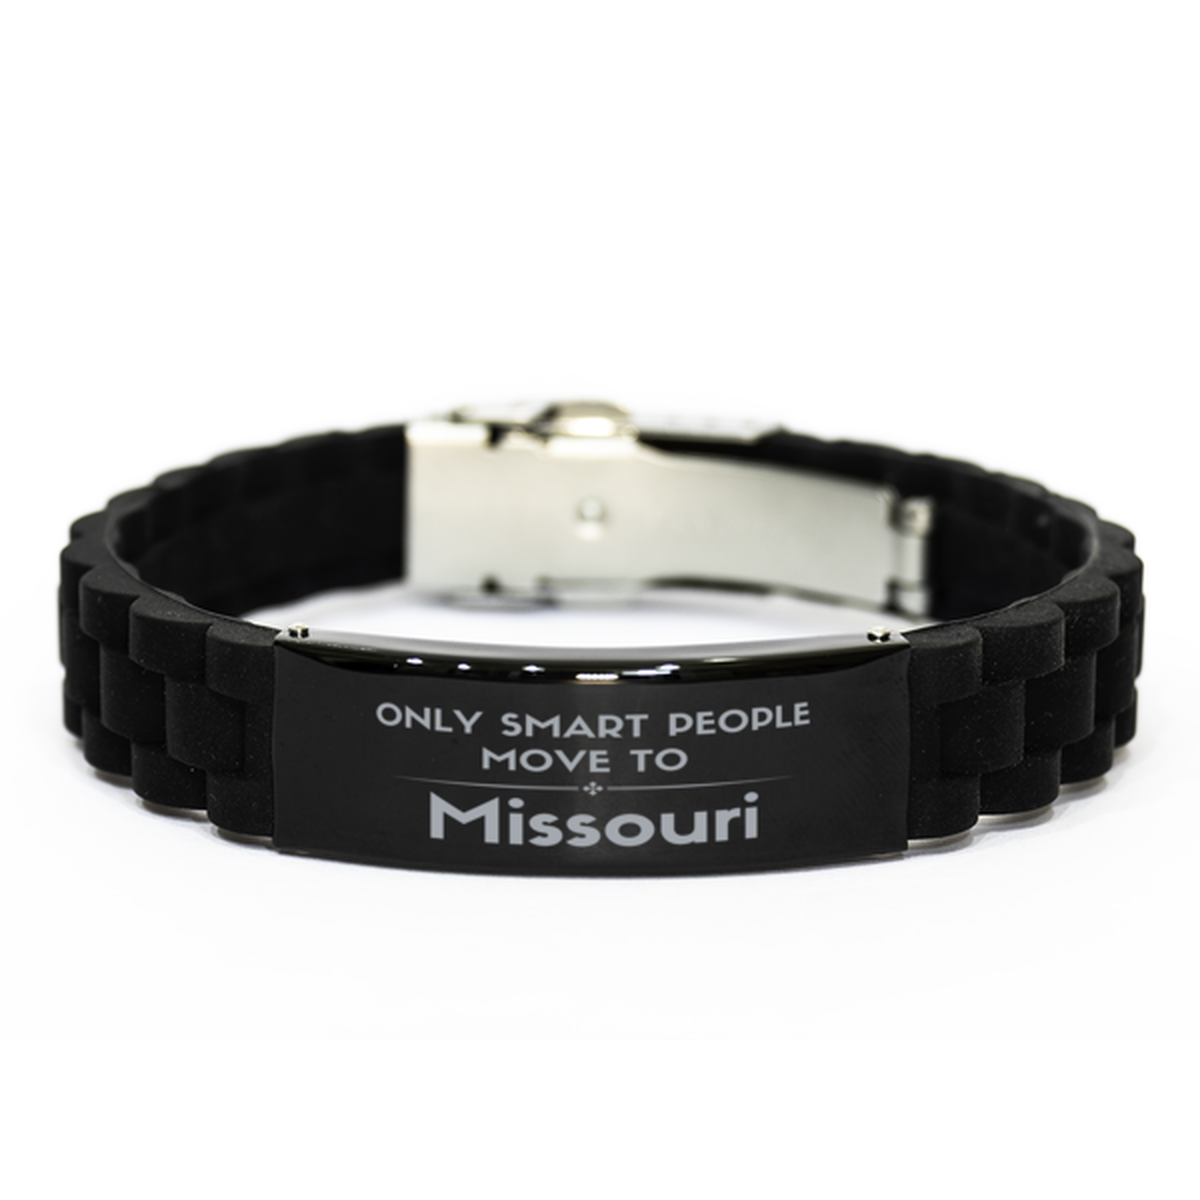 Only smart people move to Missouri Black Glidelock Clasp Bracelet, Gag Gifts For Missouri, Move to Missouri Gifts for Friends Coworker Funny Saying Quote